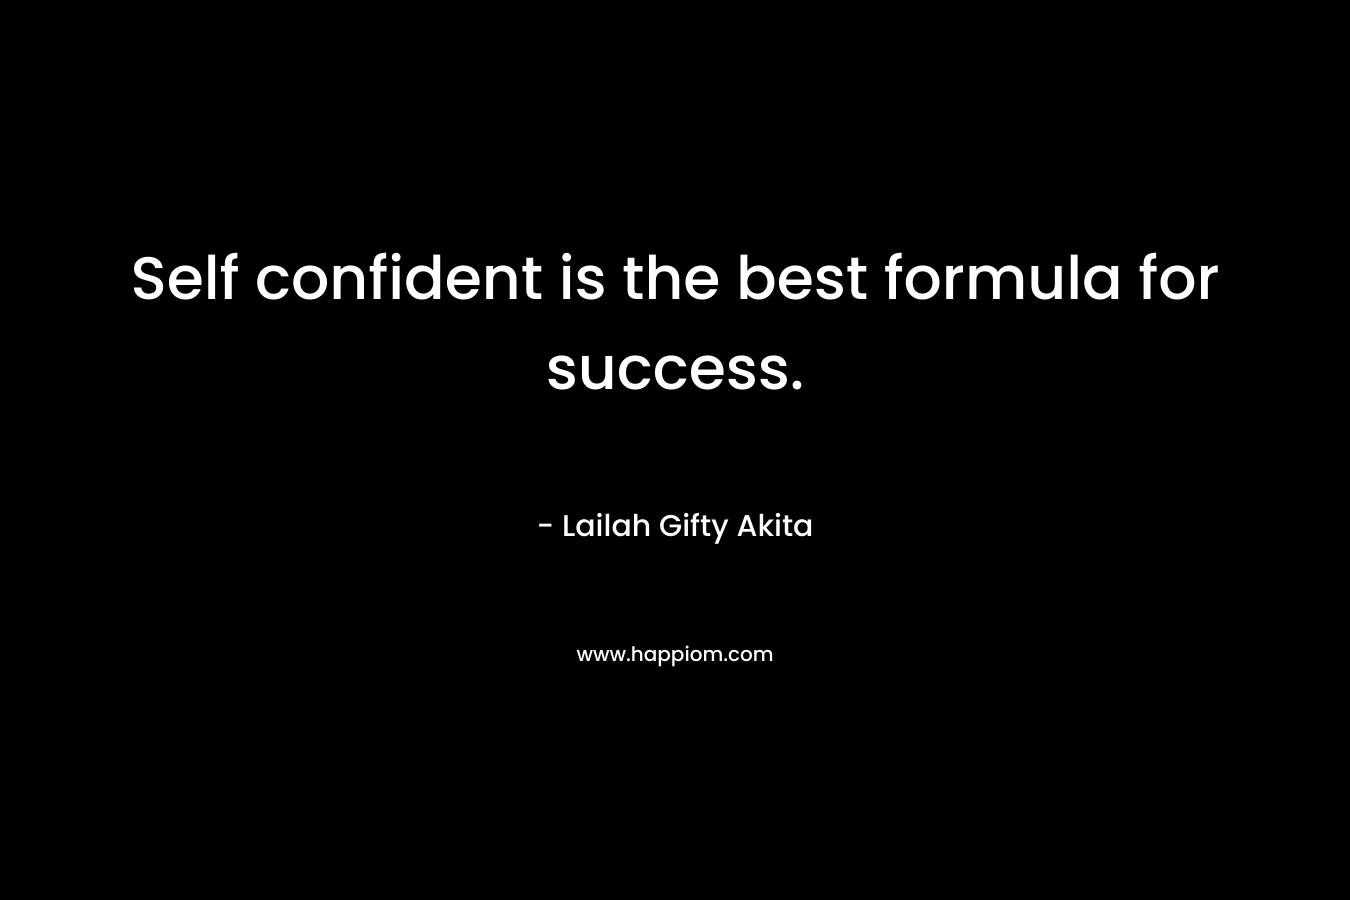 Self confident is the best formula for success.